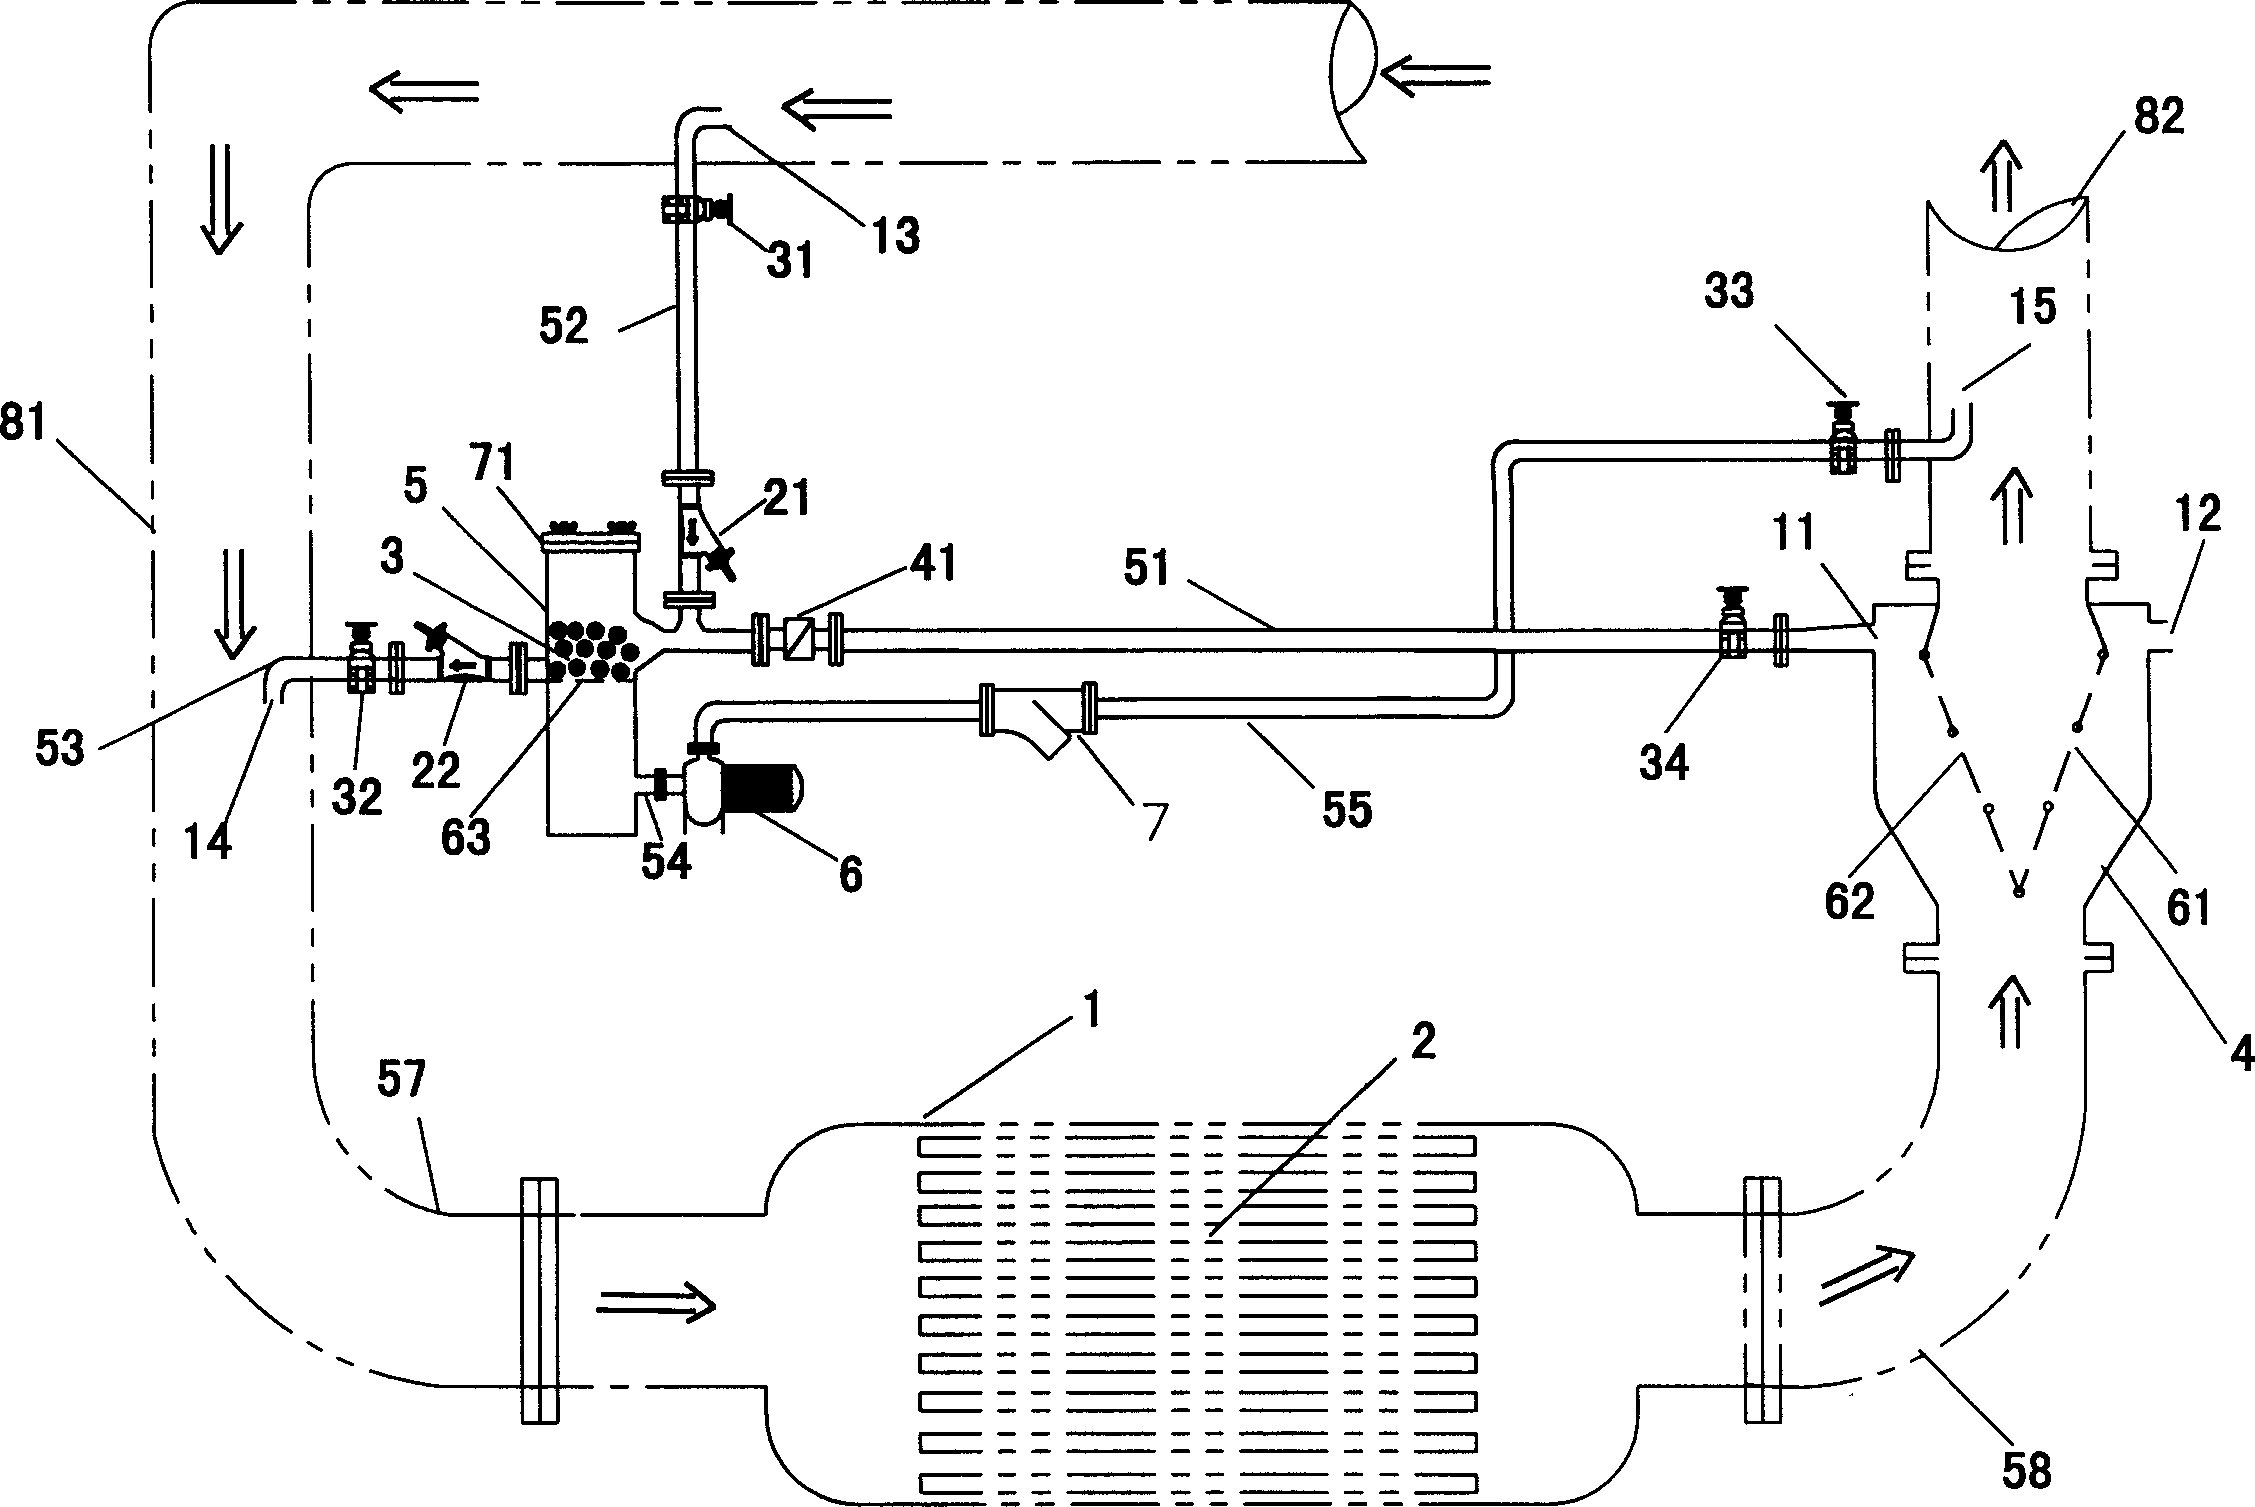 Automatic purging system in water-ballast condenser line pipes